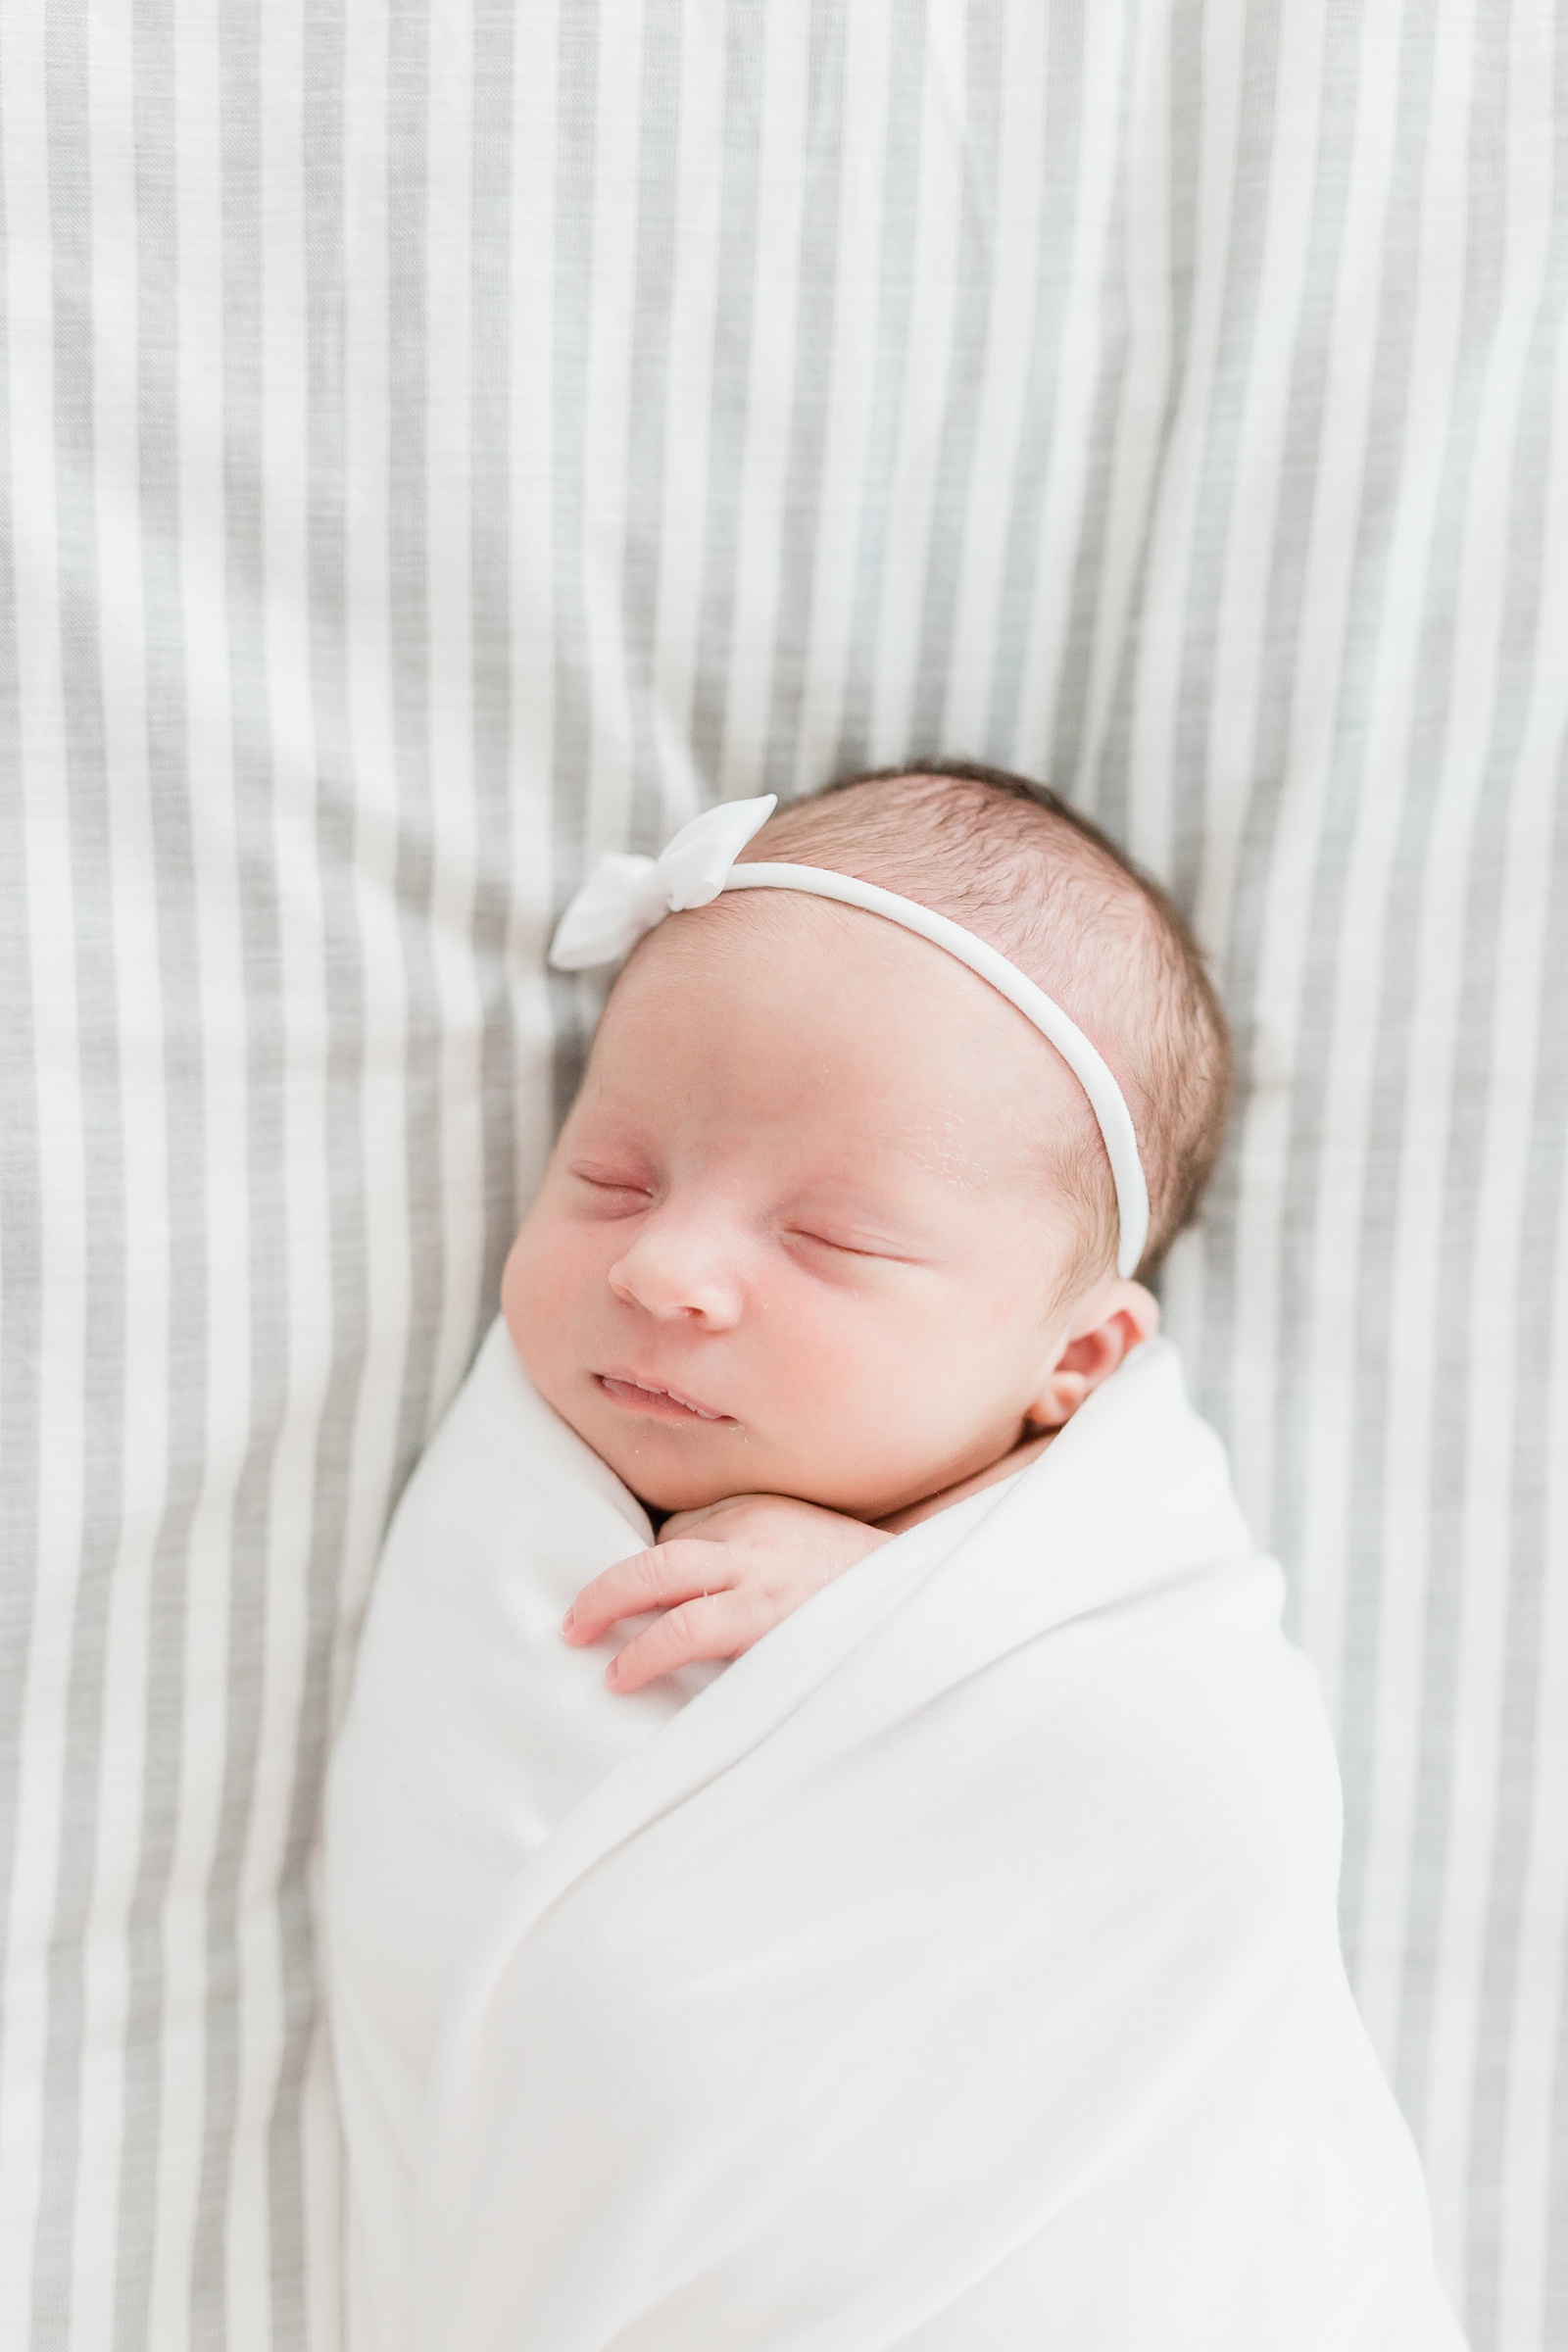 Baby girl during lifestyle newborn session in Mount Pleasant, SC | Caitlyn Motycka Photography